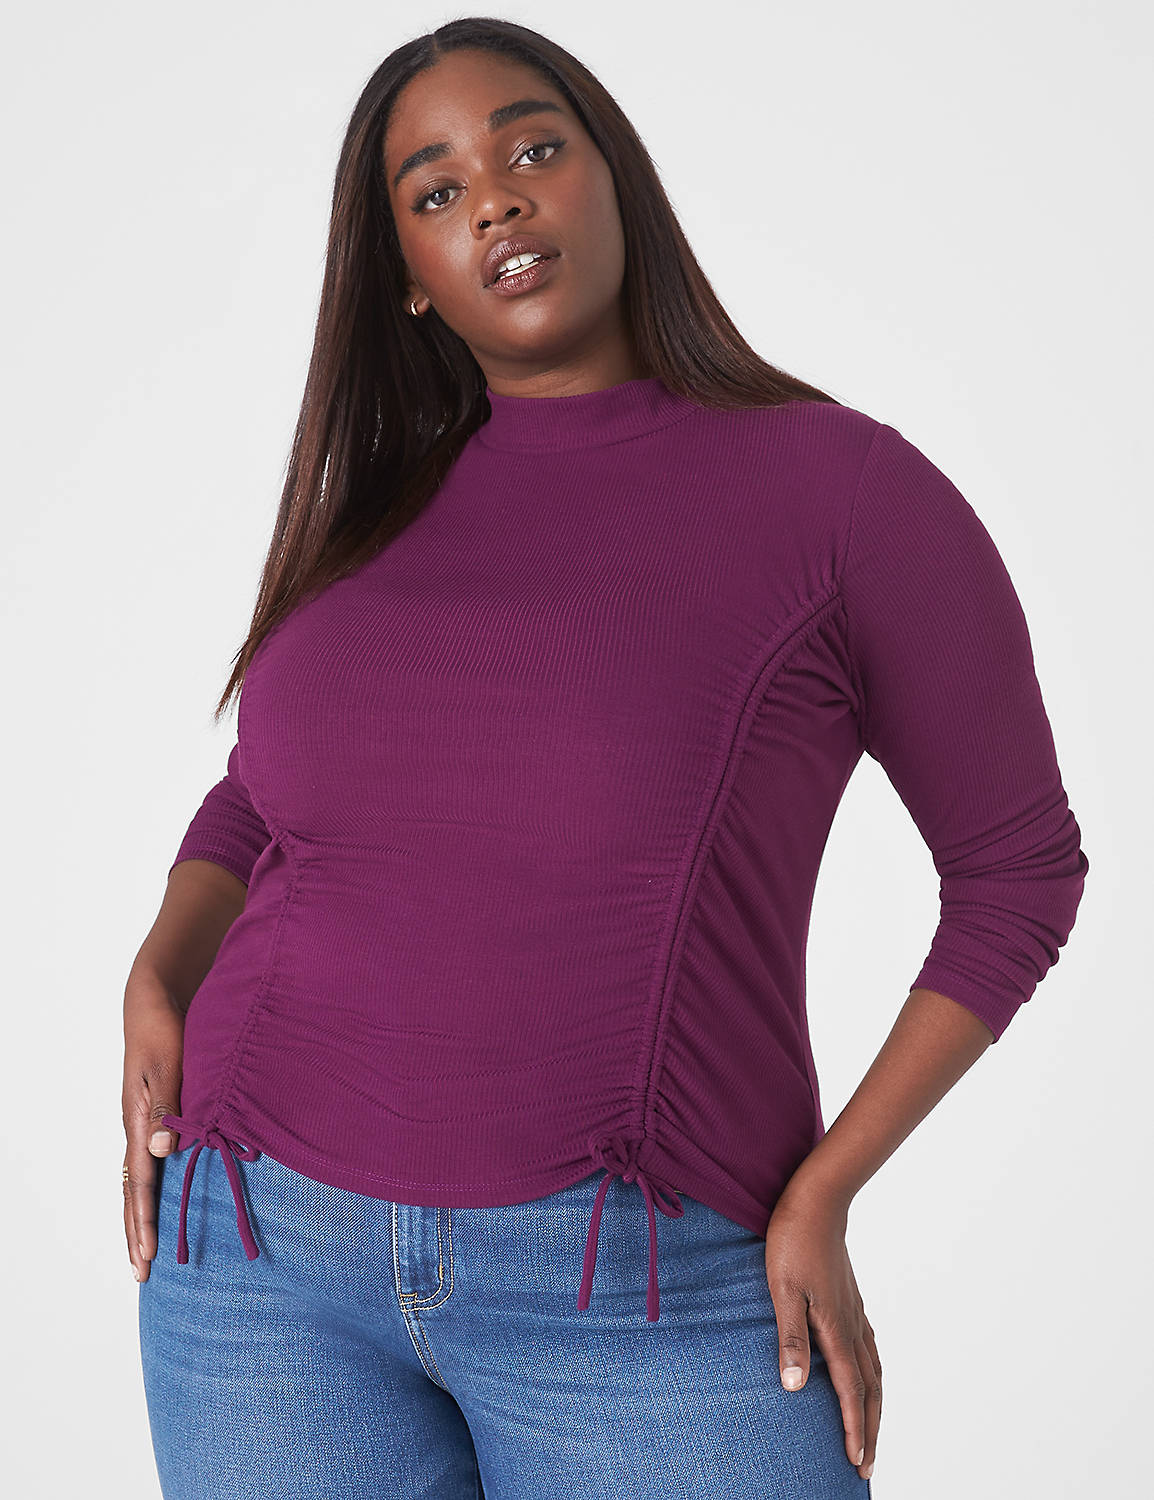 Fitted Long Sleeve Mock Neck Tee Wi Product Image 3